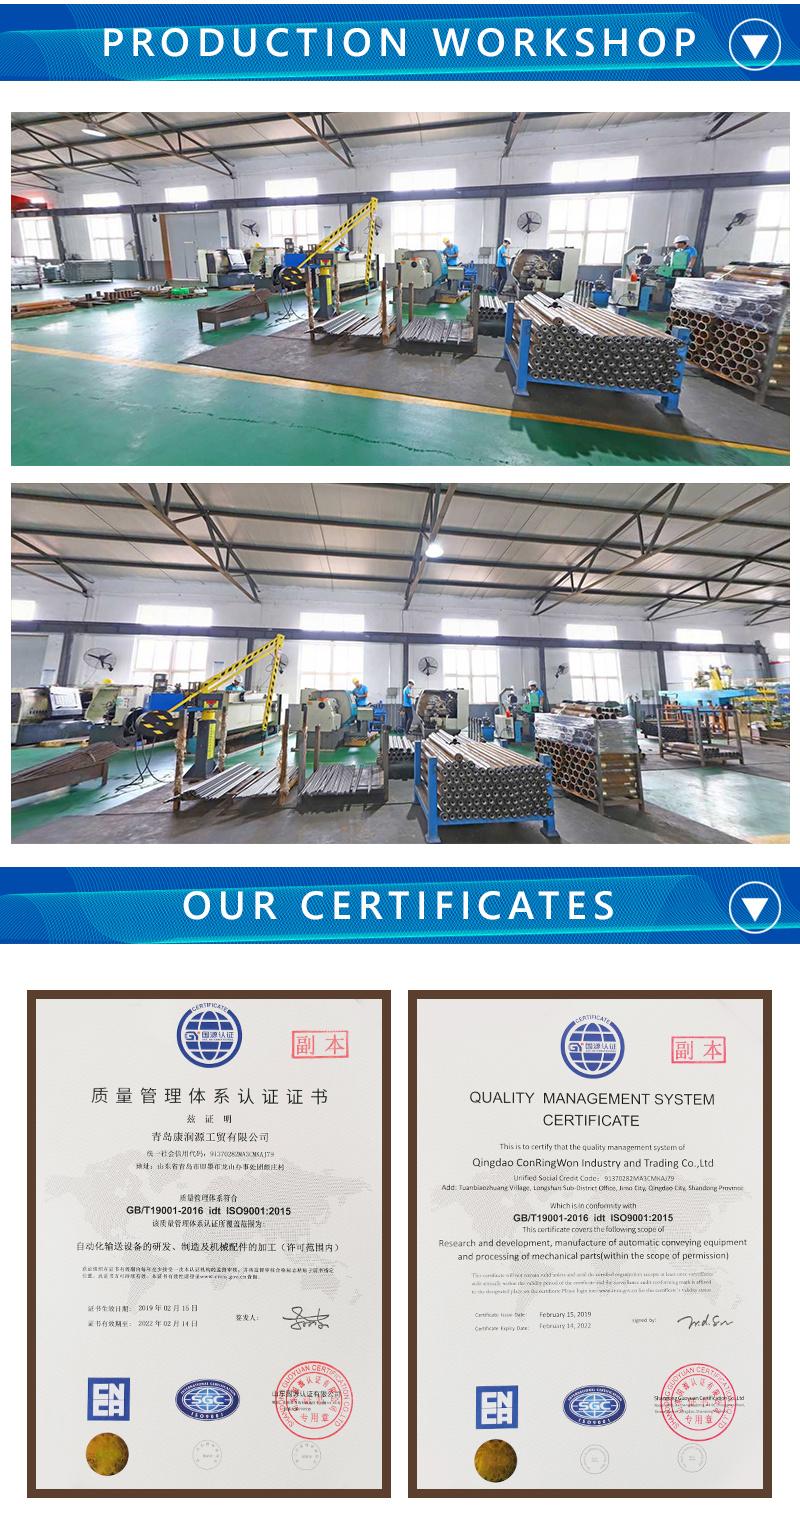 Gravity Roller Conveyor and Conveyor Roller for Warehouse System